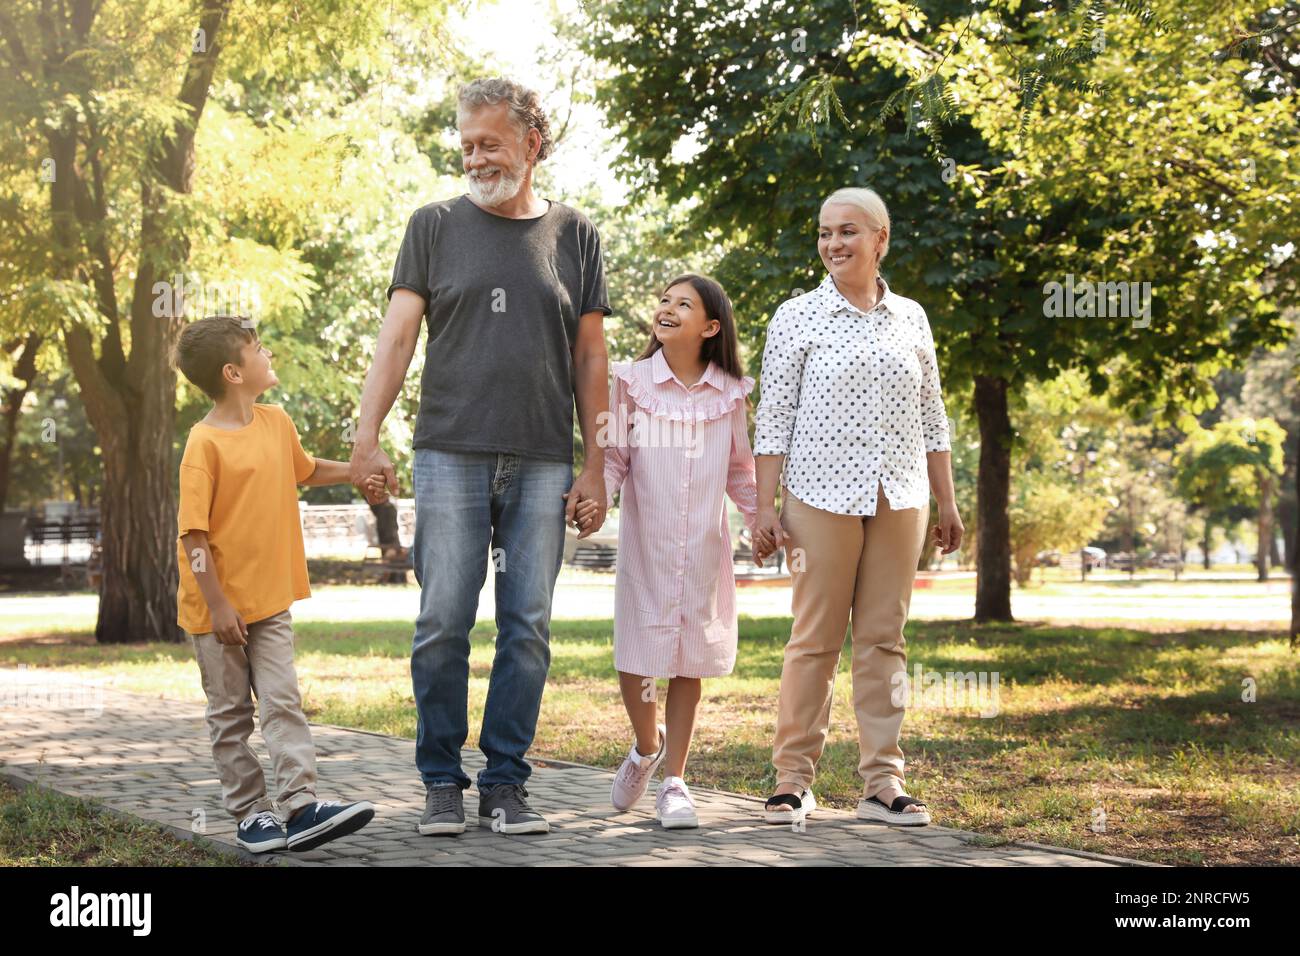 Happy grandparents with little children walking together in park Stock Photo